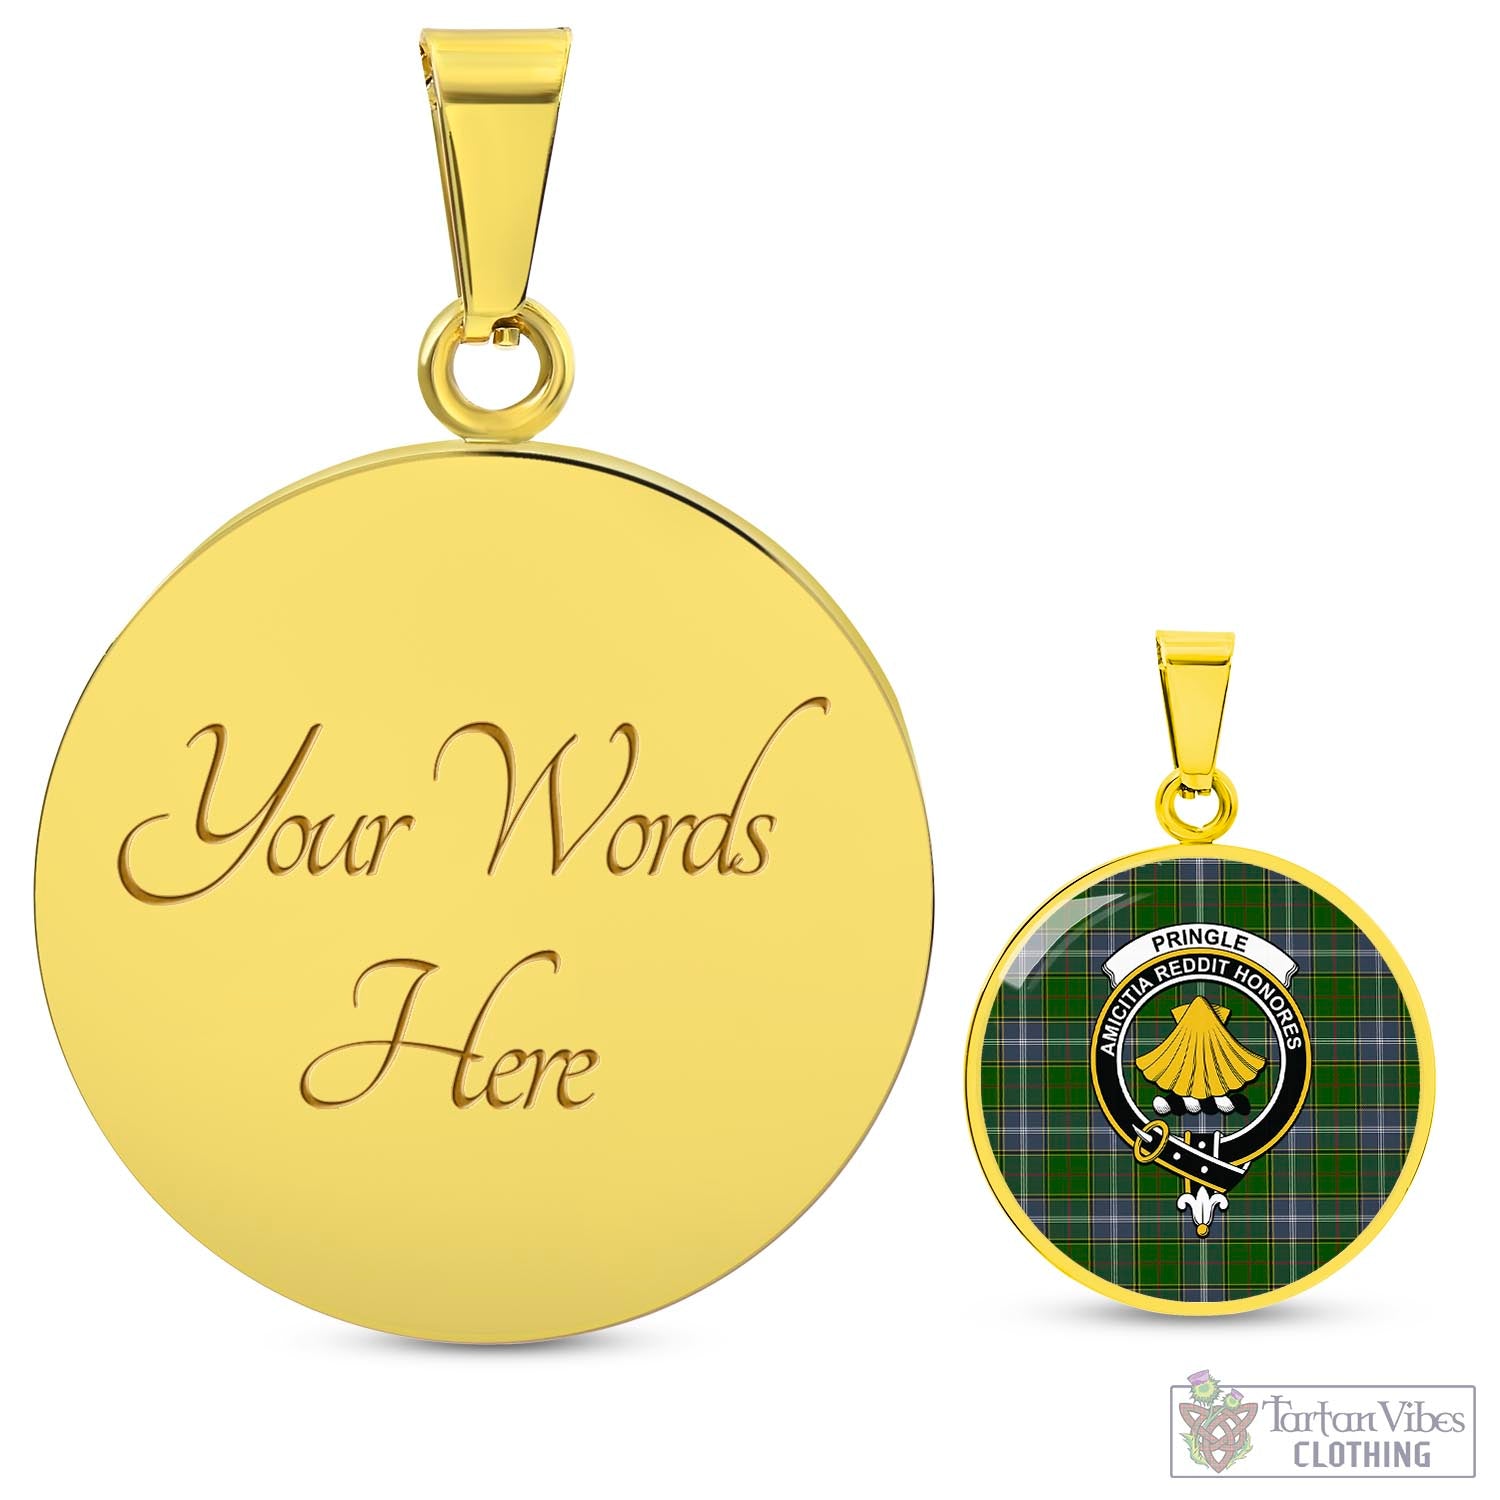 Tartan Vibes Clothing Pringle Tartan Circle Necklace with Family Crest